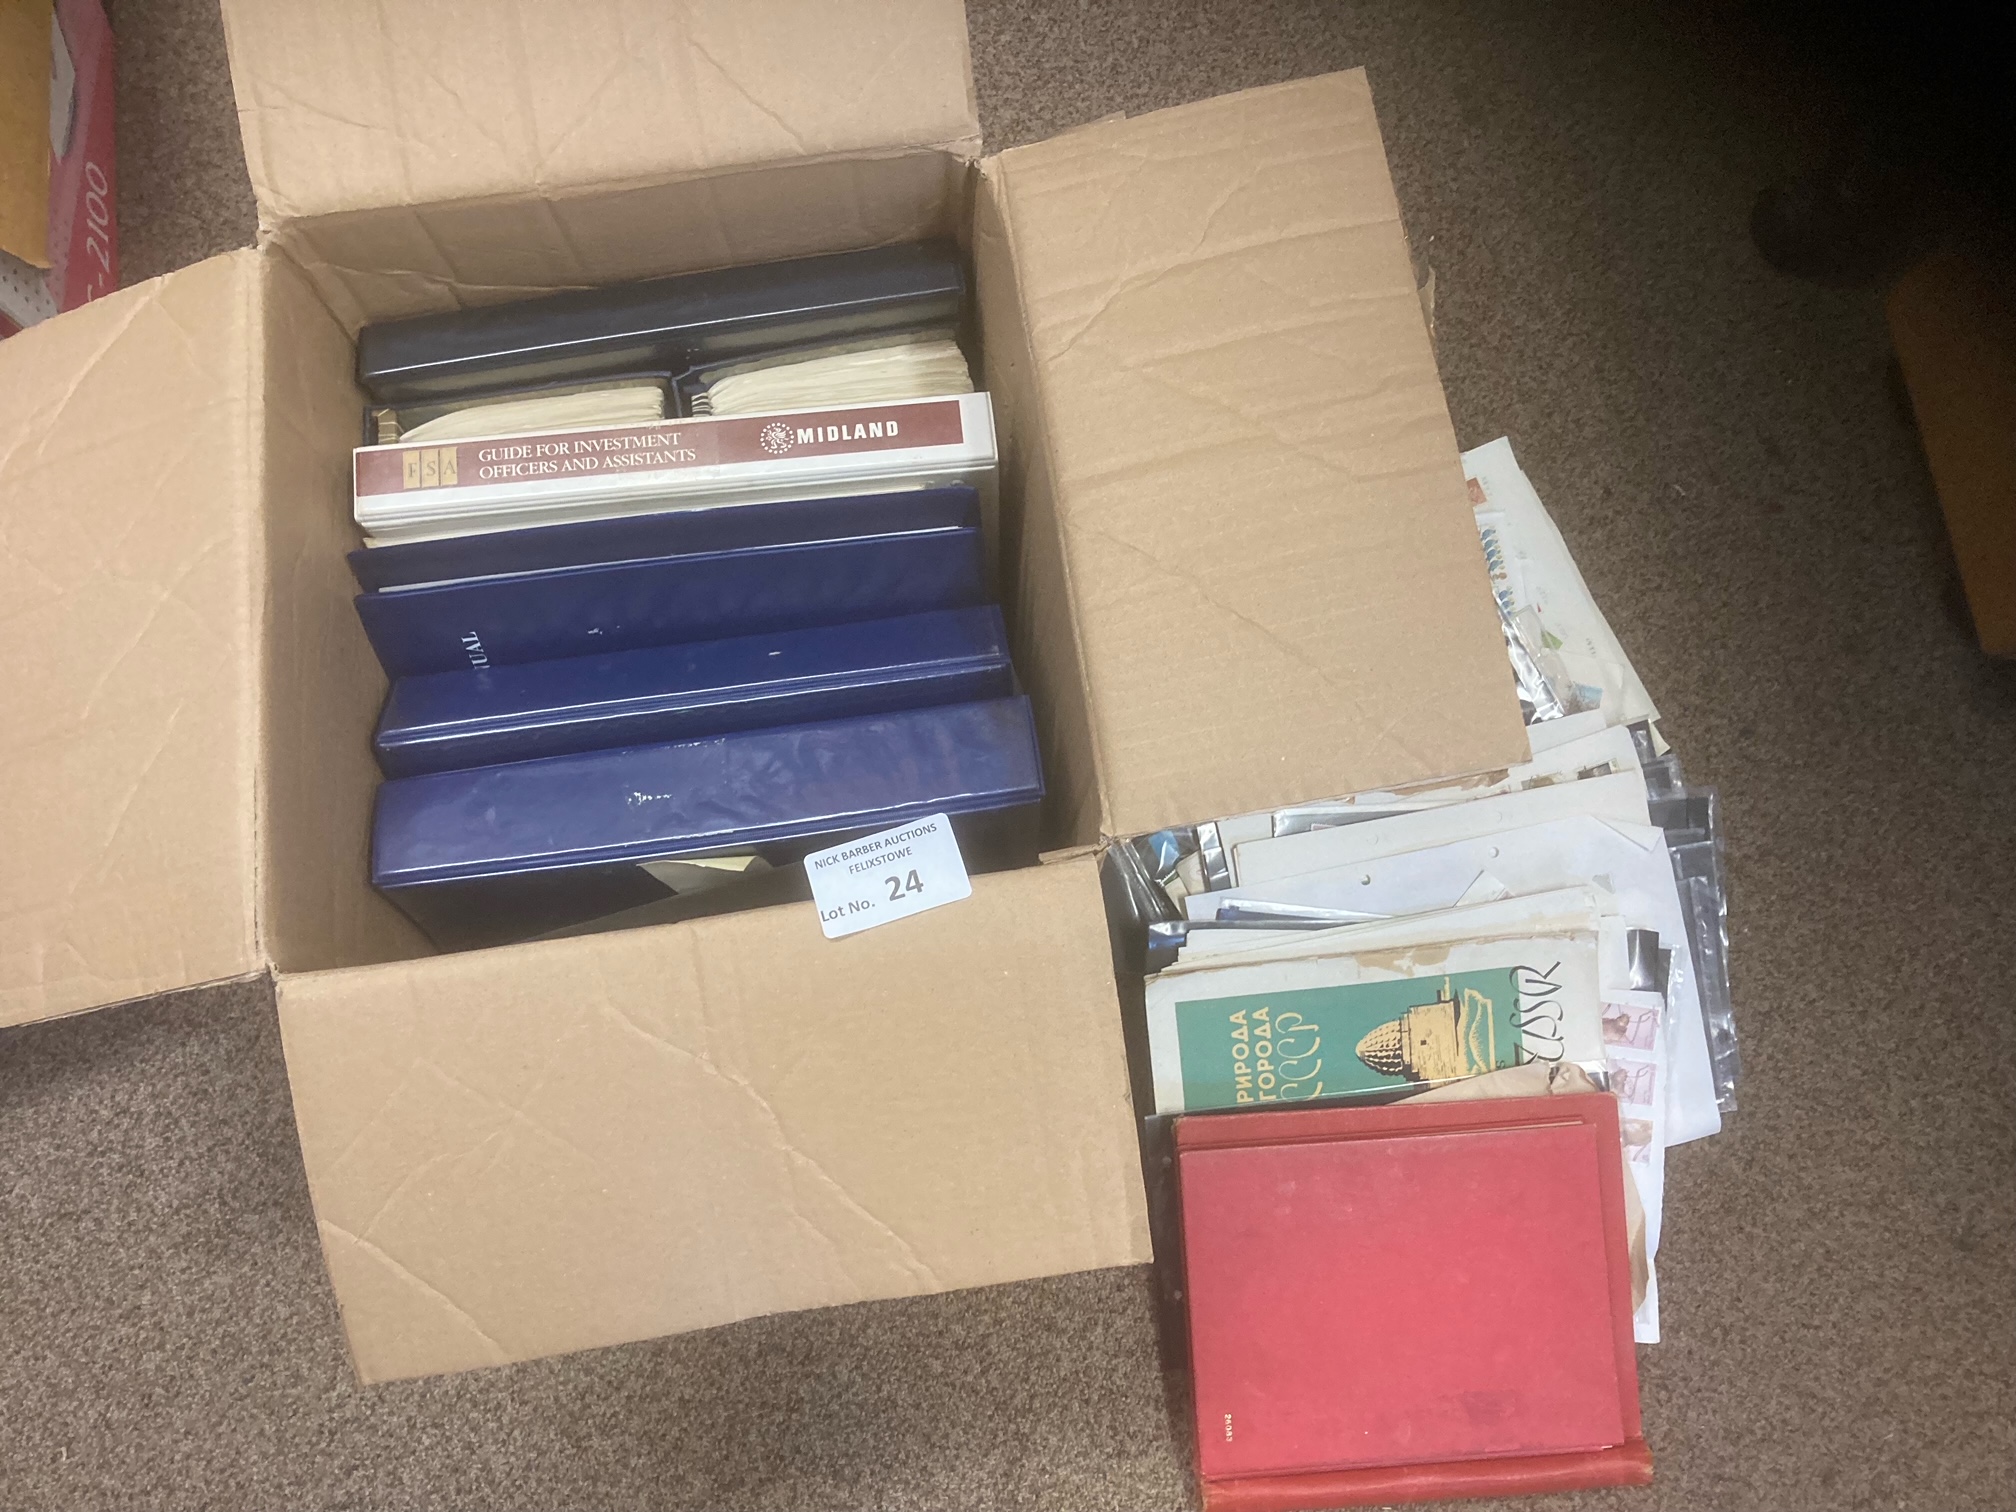 Stamps : Large box mostly duplicated used GB issue